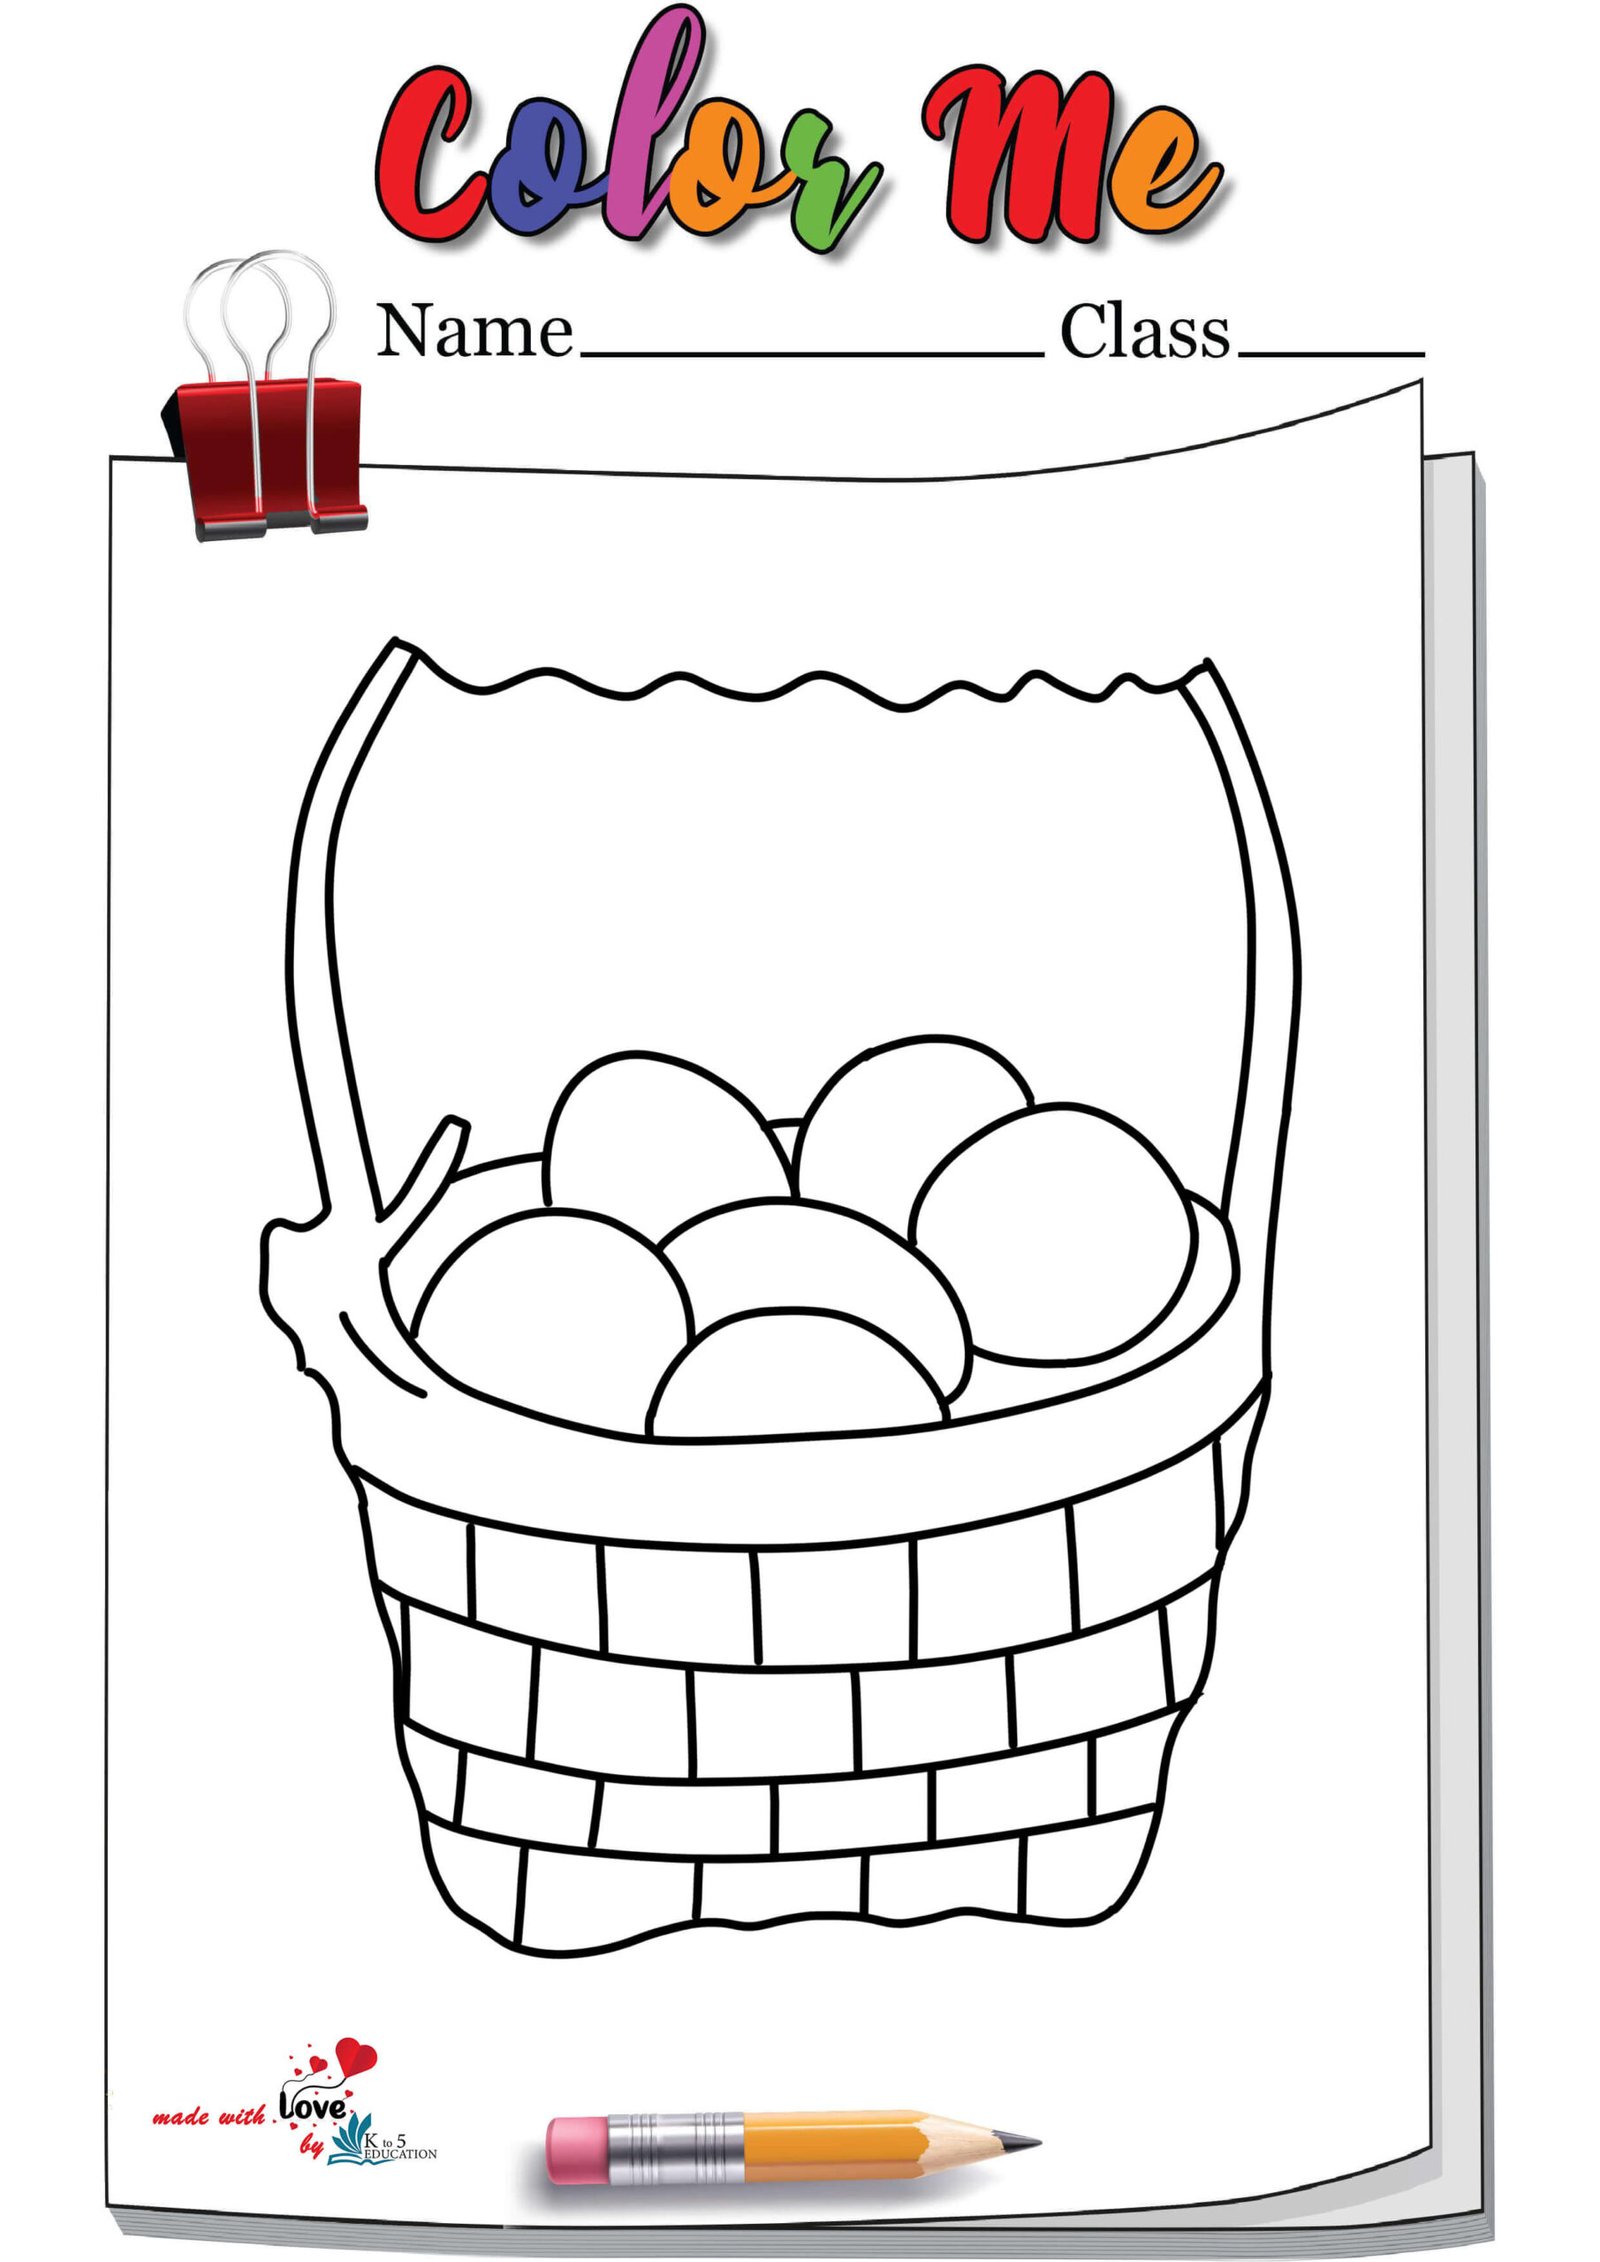 Easter Egg In Bucket Coloring Page